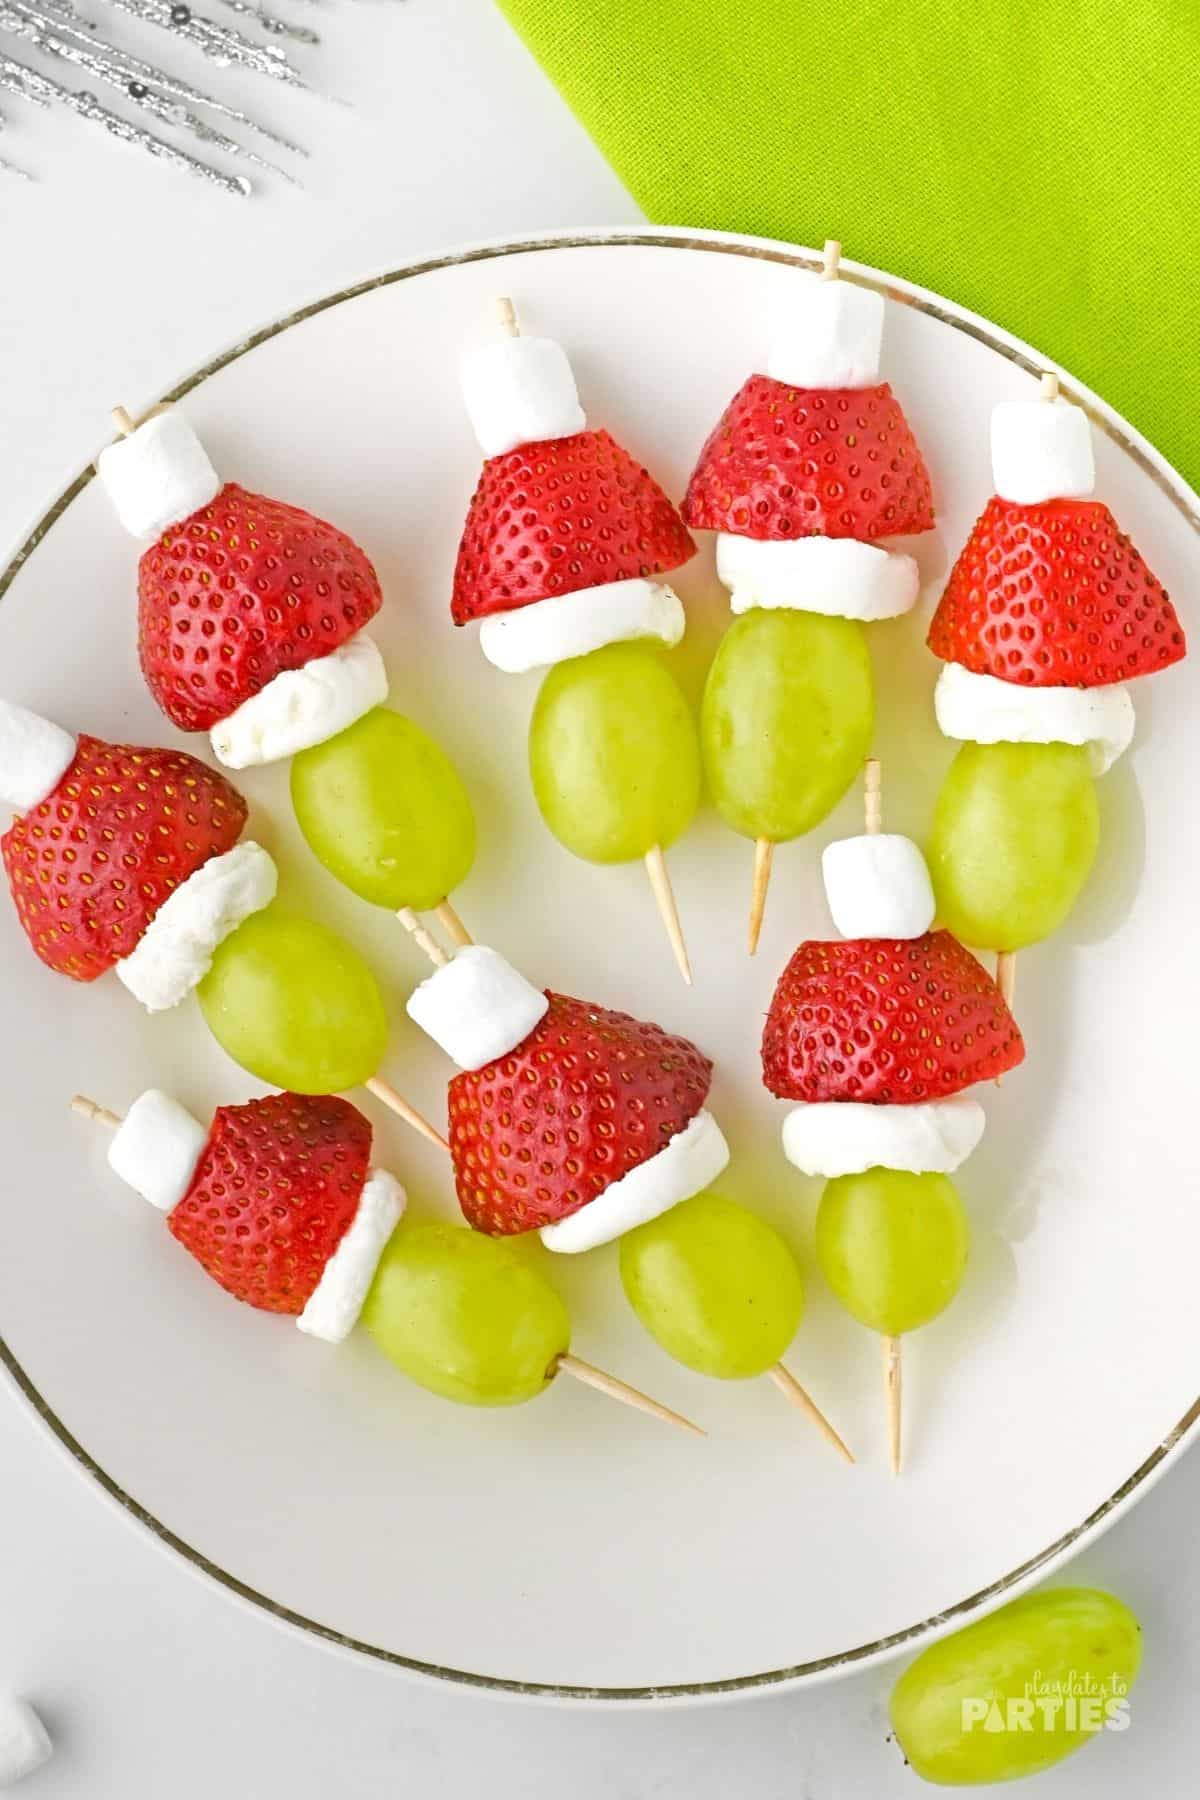 Green grapes with Santa hats made from marshmallows and strawberries.